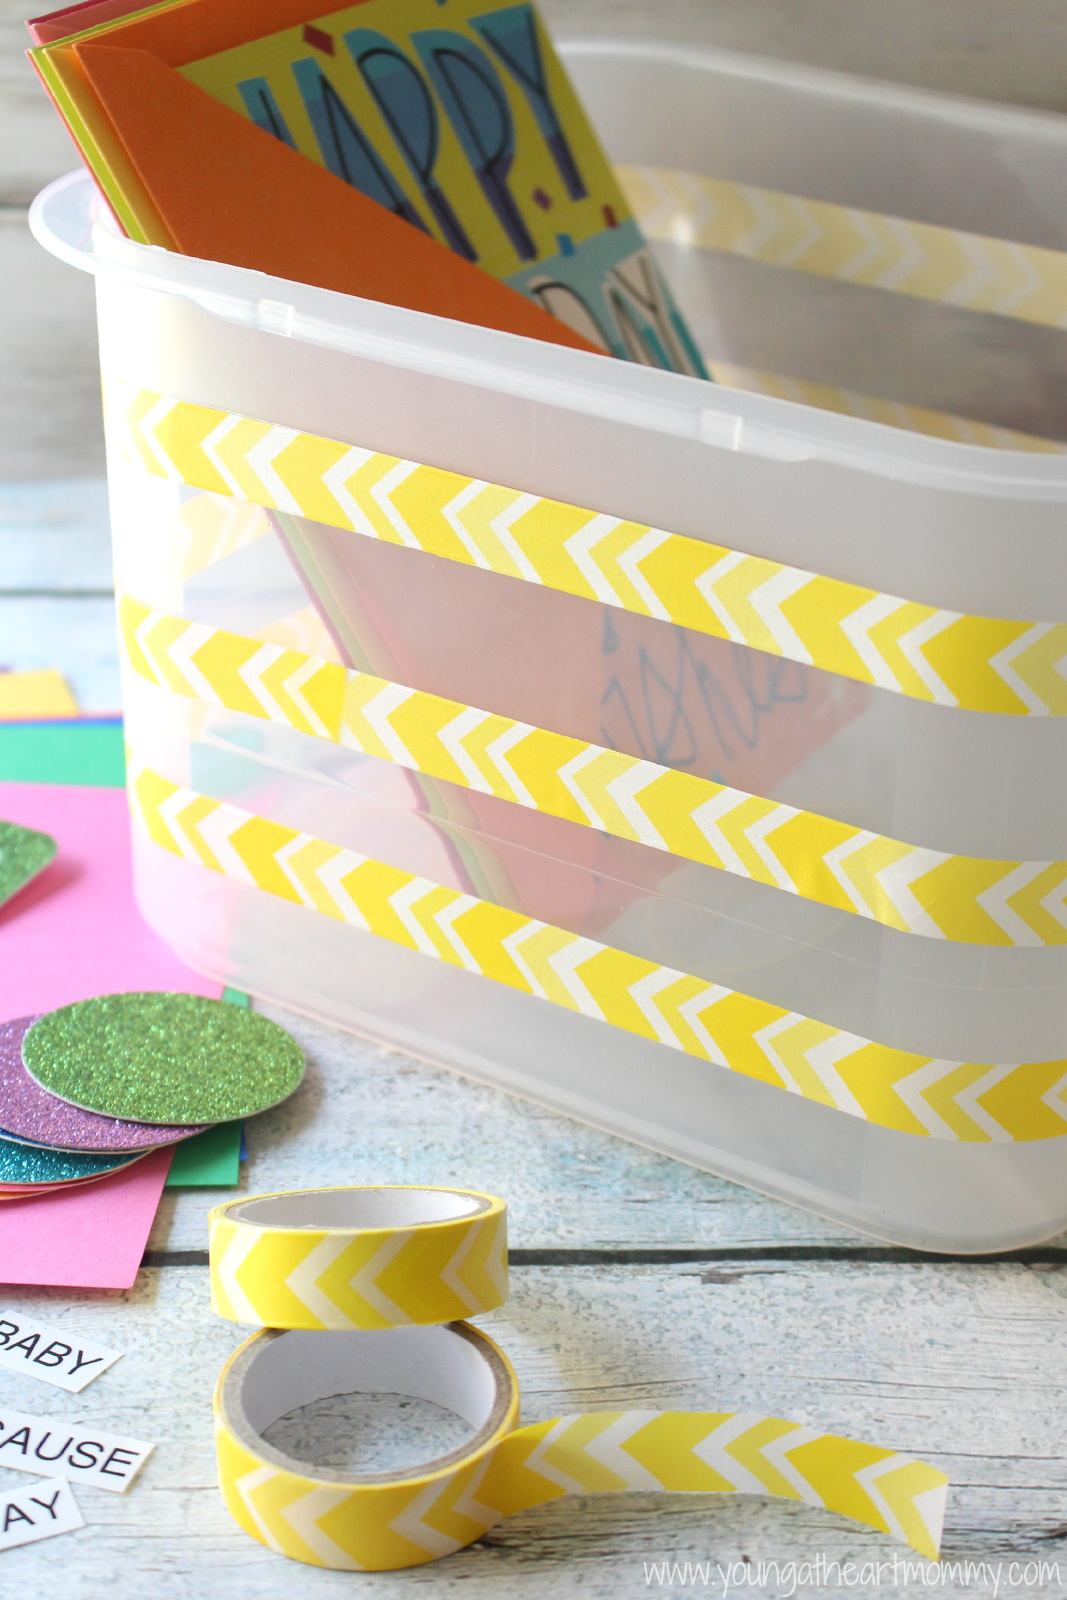 Design And Personalize Your Greeting Card Holder With Colored Washi Tape